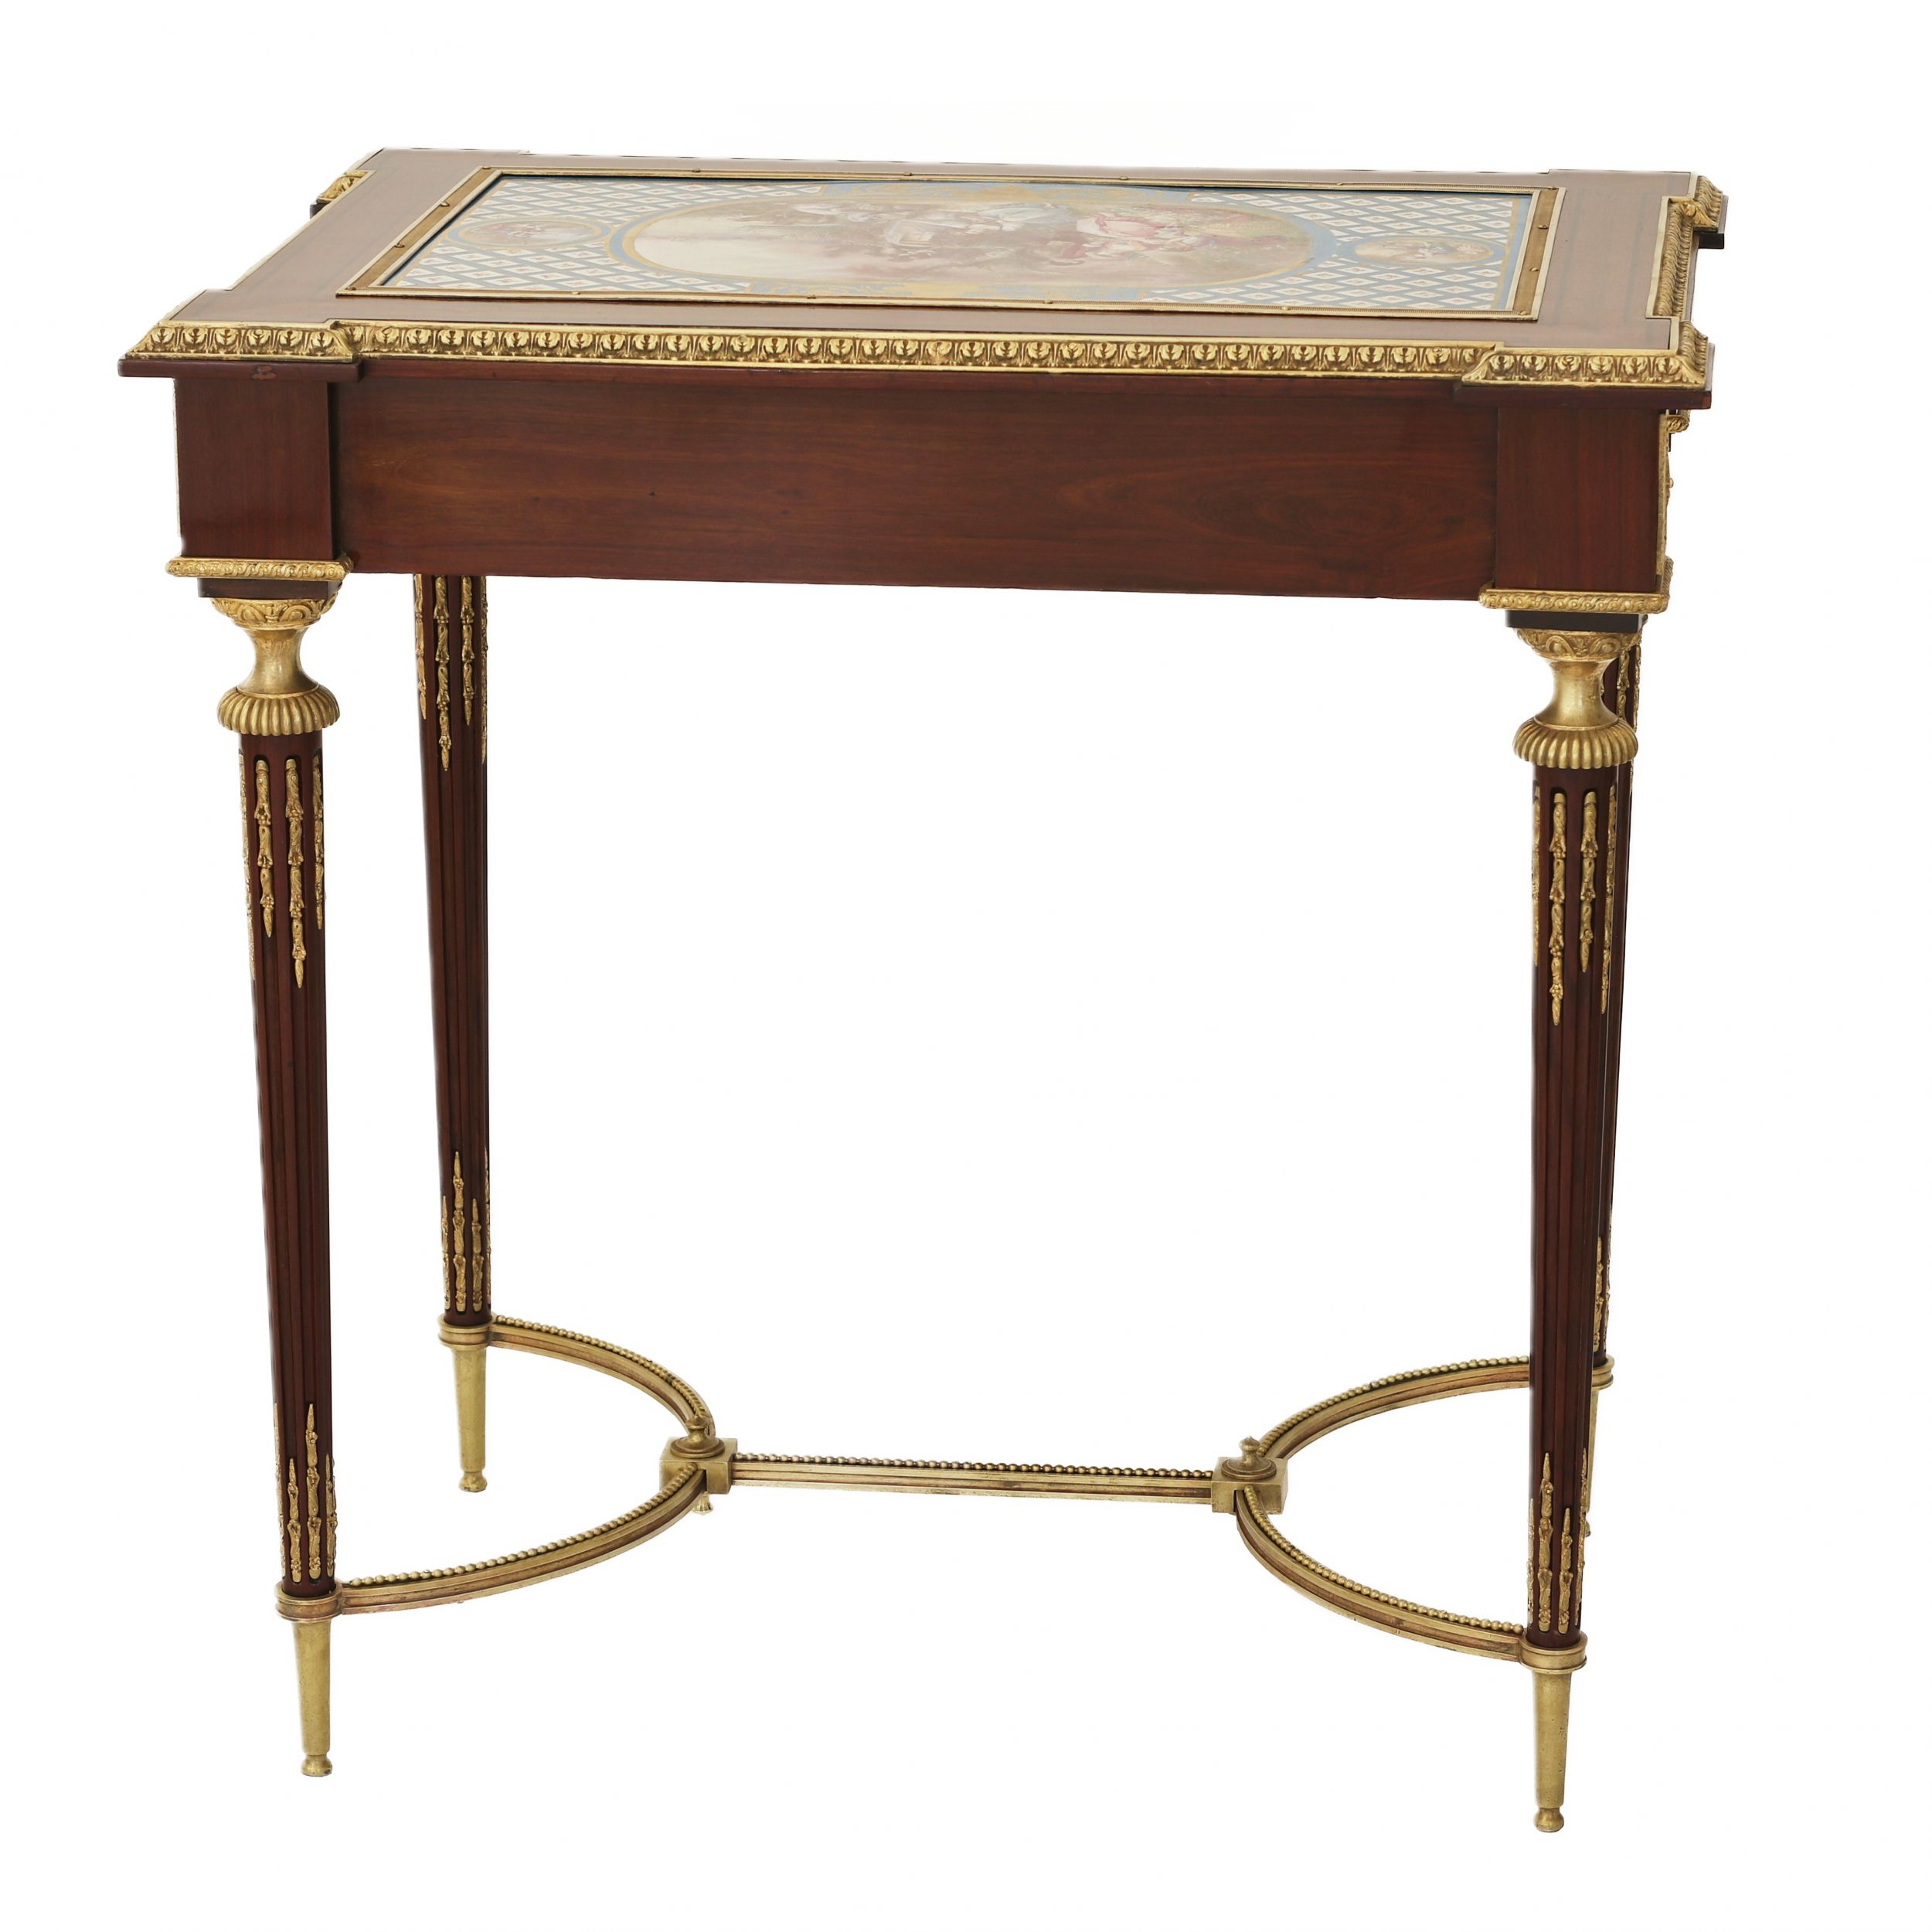 A magnificent ladies table with gilded bronze decor and porcelain panels in the style of Adam Weiswe - Image 6 of 12